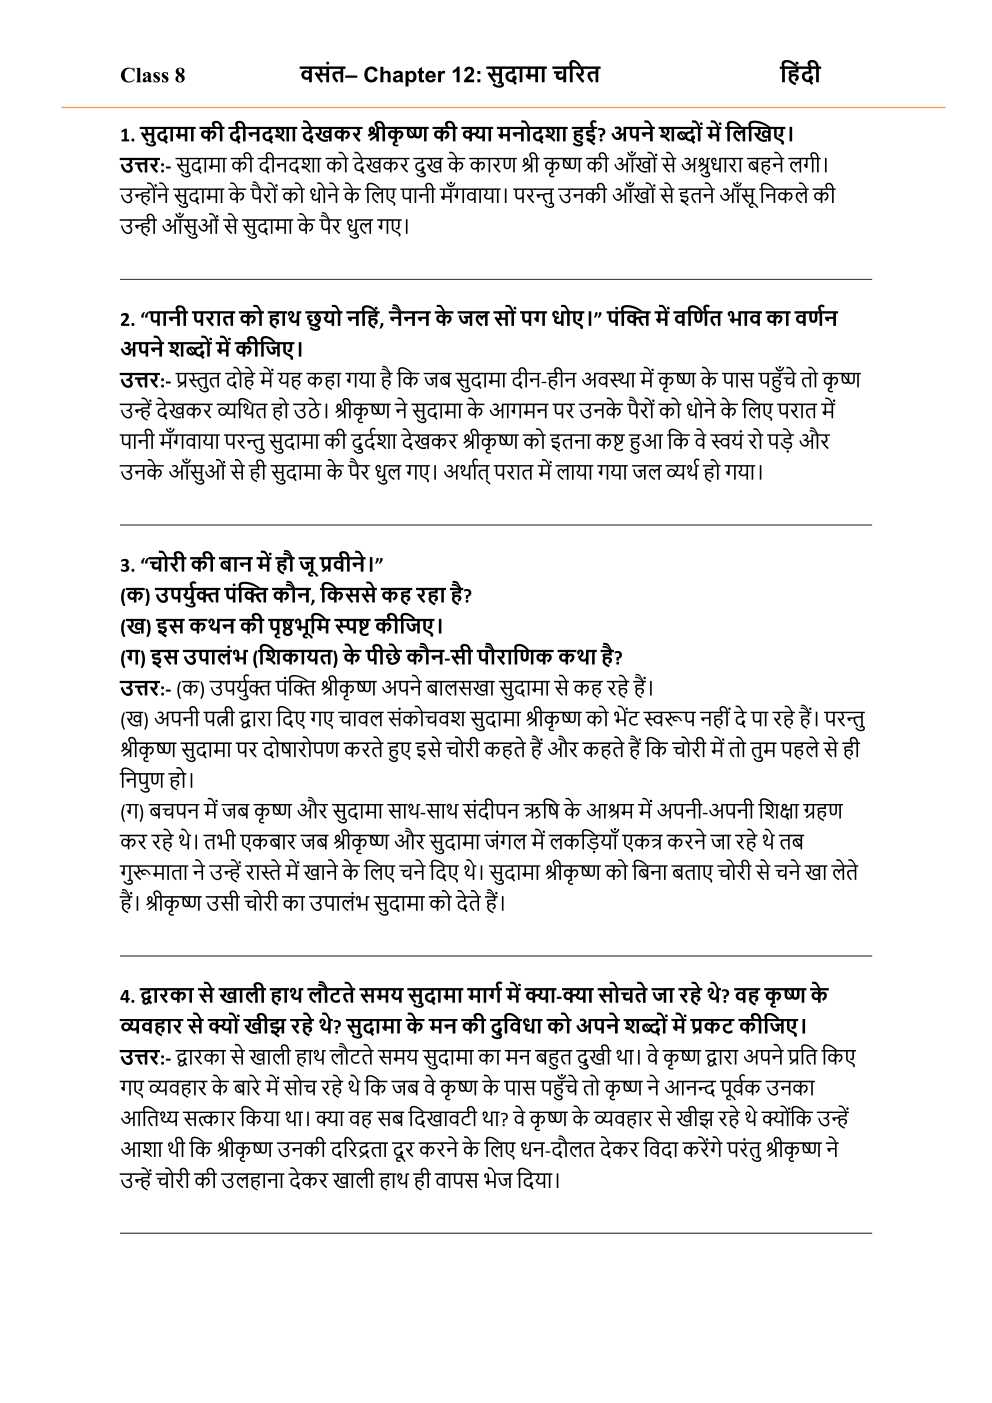 NCERT Solutions For Class 8 Hindi Vasant Chapter 12